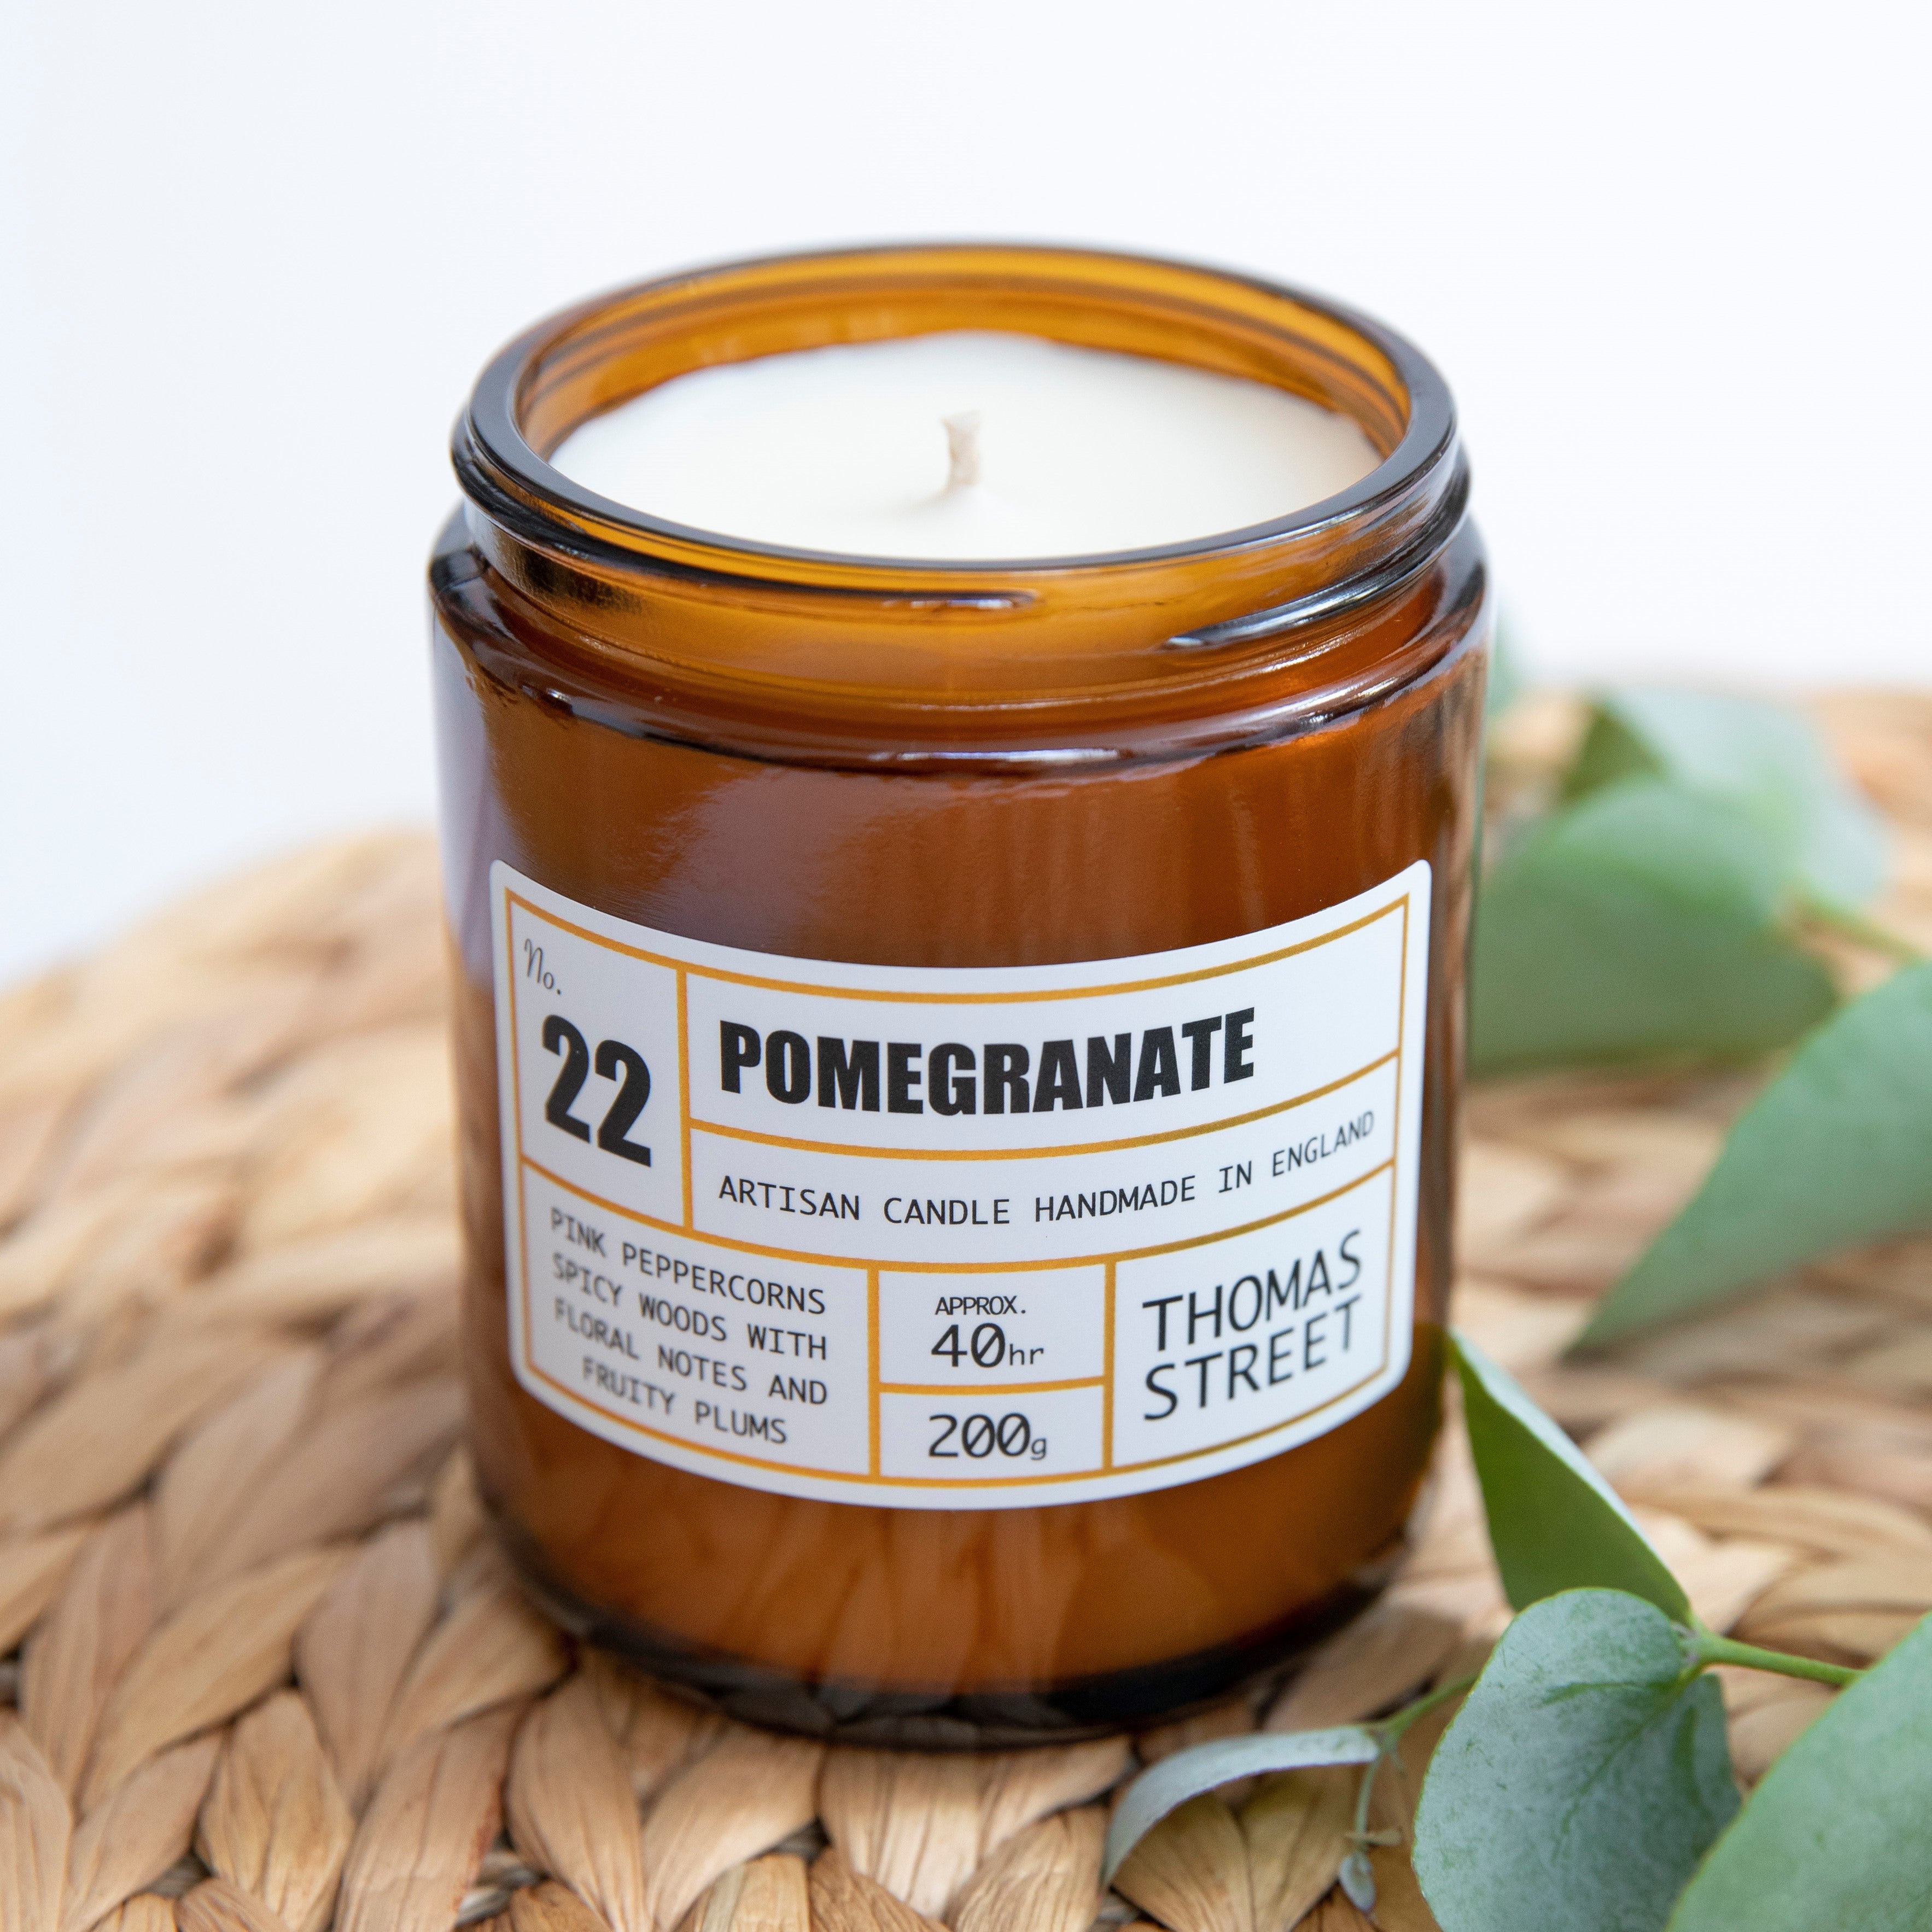 Thomas Street Pomegranate Soy Wax Scented Candle